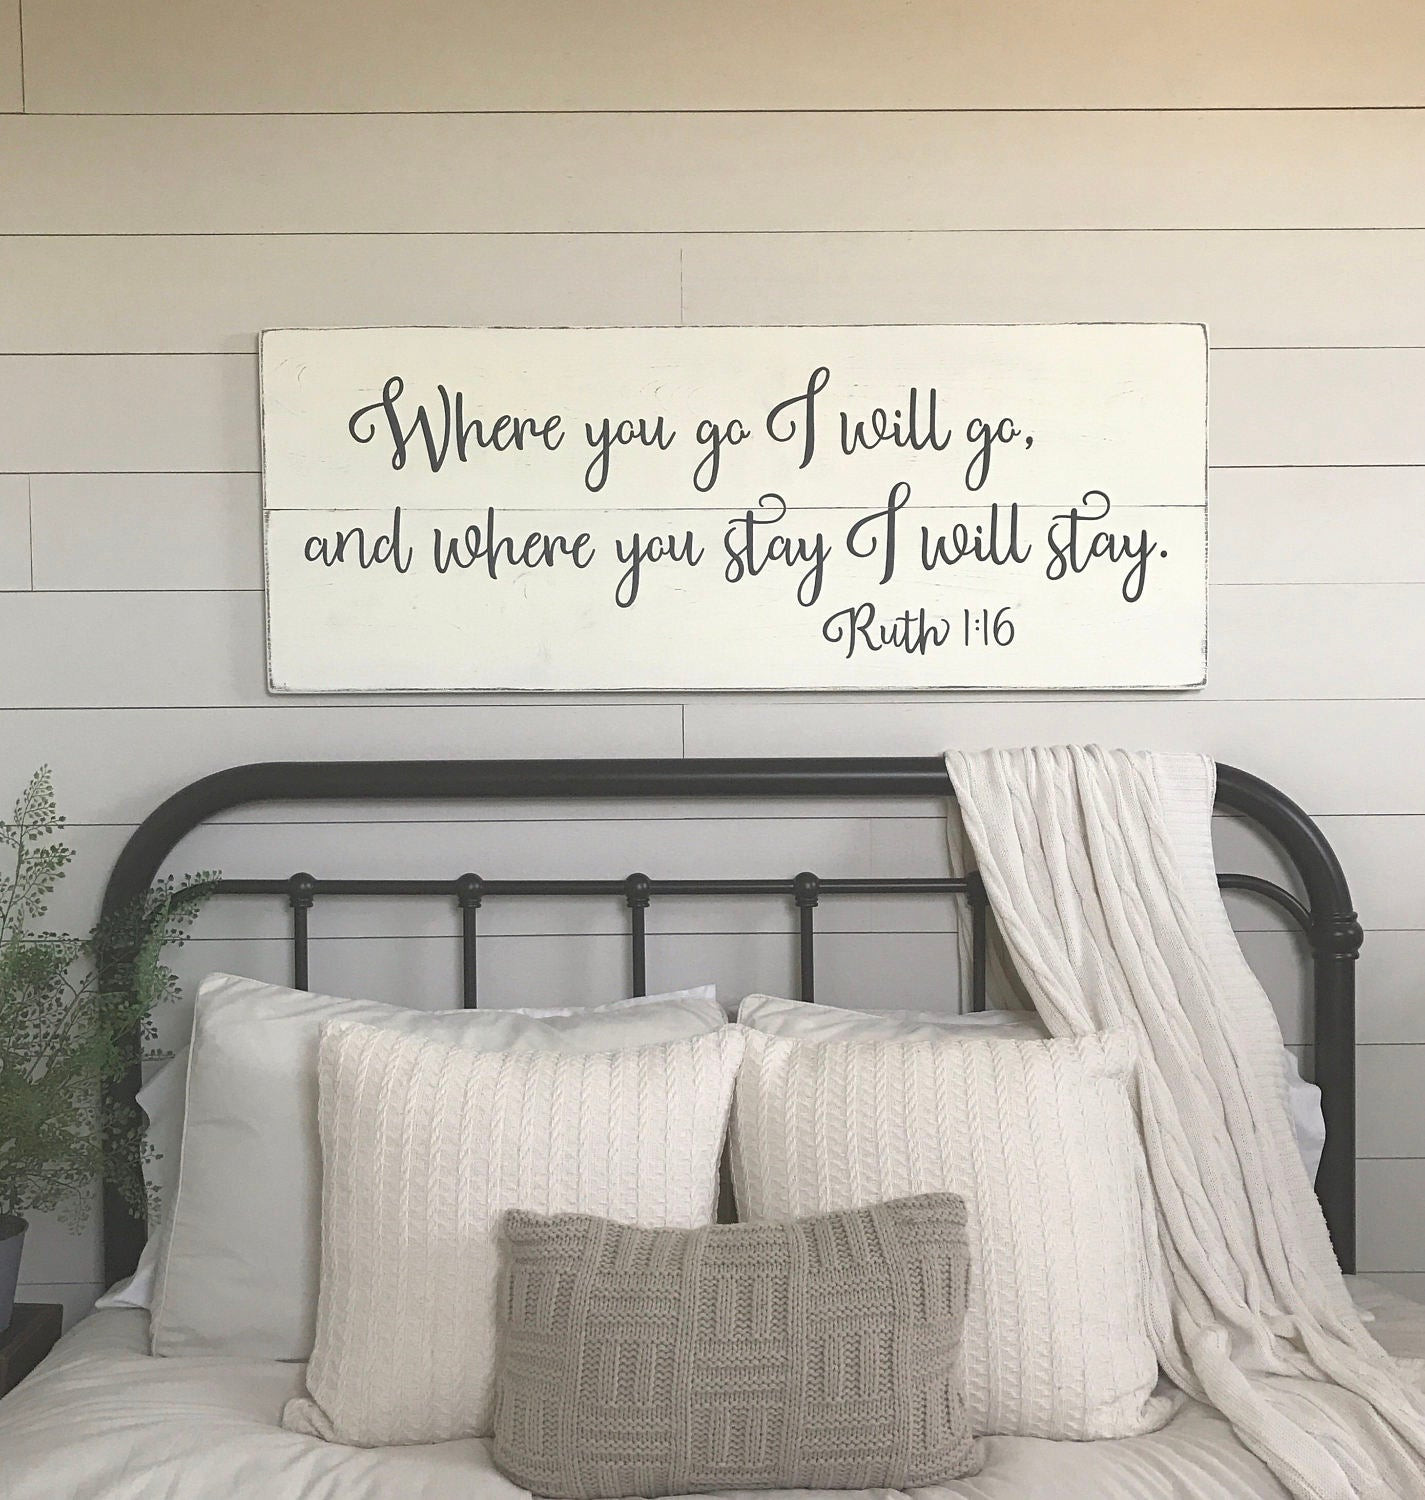 Wall Decorations For Master Bedroom
 Bedroom wall decor Where you go I will go wood signs